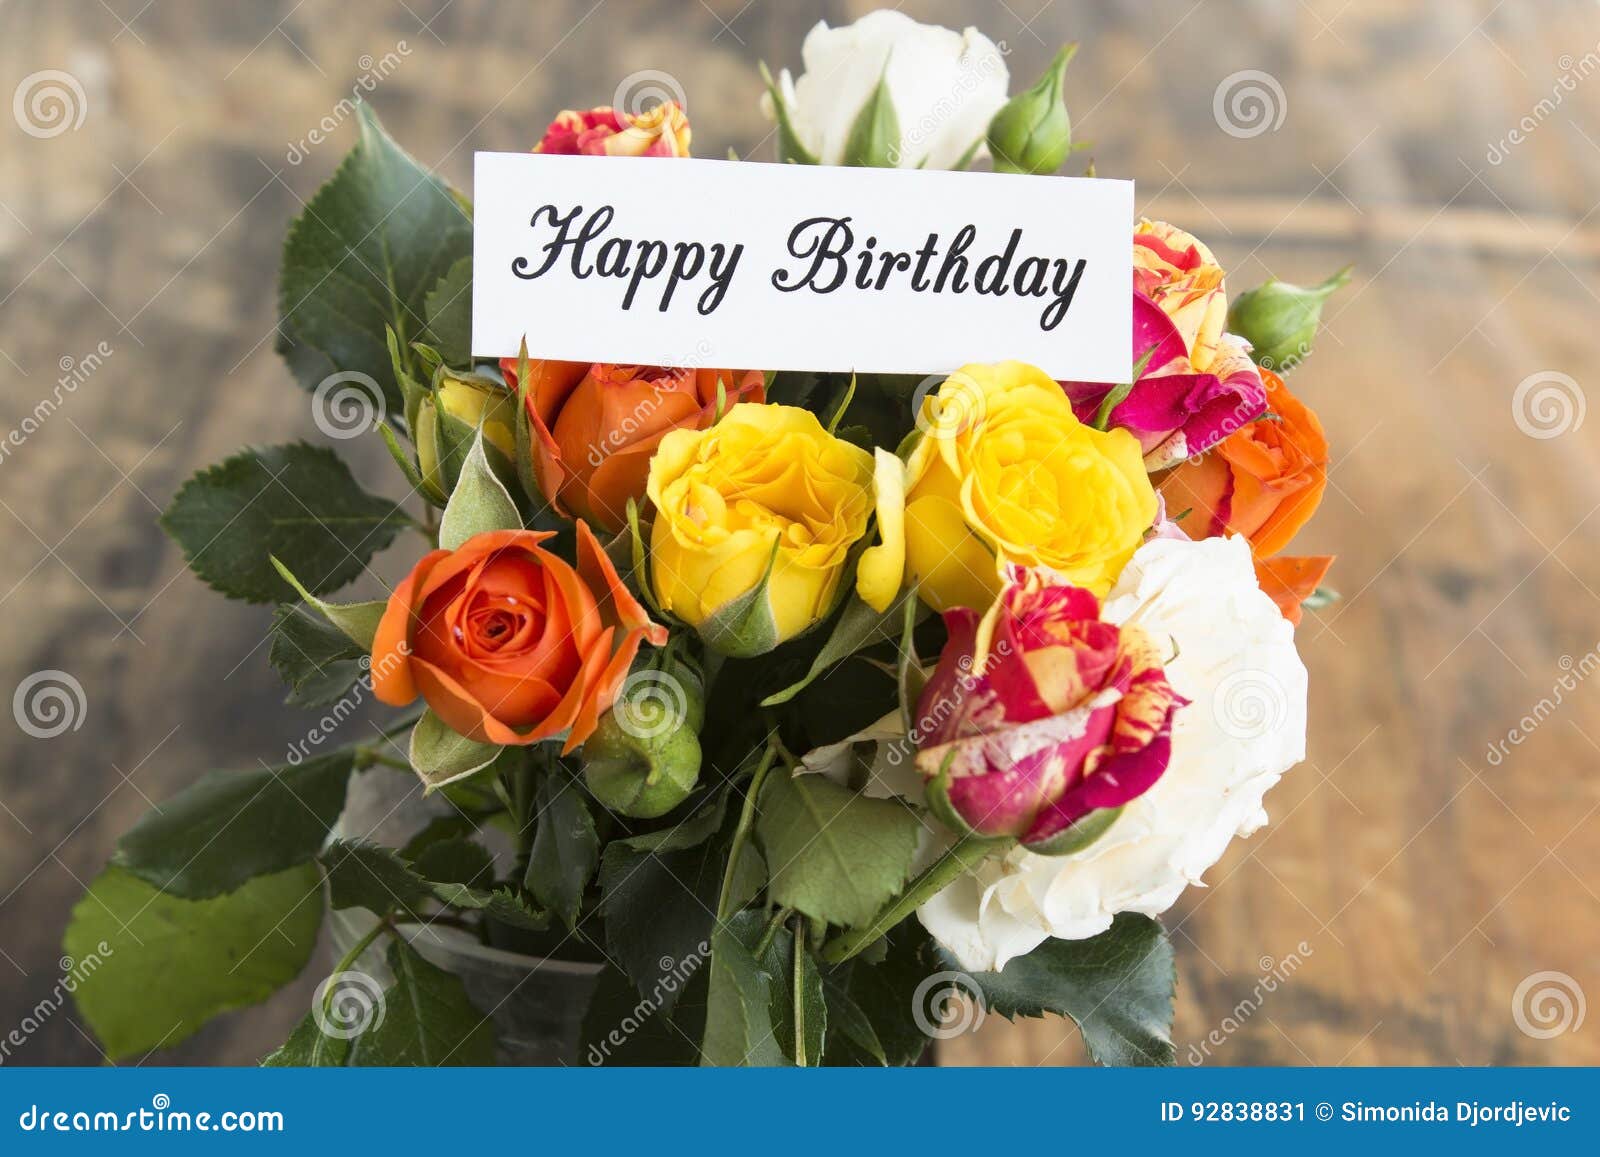 Happy Birthday Roses Images – Browse 117,700 Stock Photos, Vectors